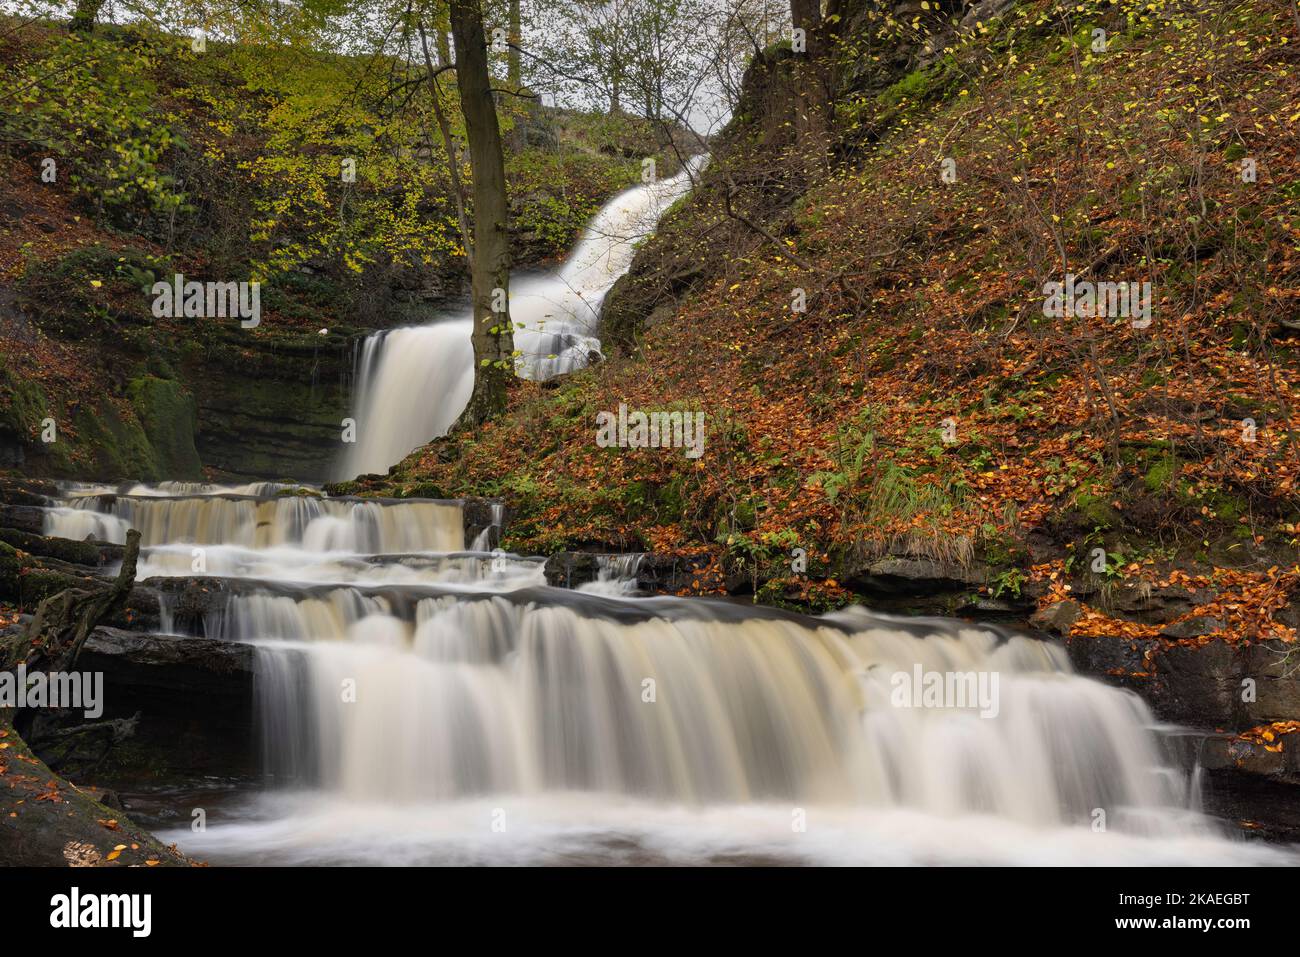 Scaleber Force is a 40 foot high waterfall on Stockdale Beck, near to the village of Settle in the Yorkshire Dales National Park, UK Stock Photo